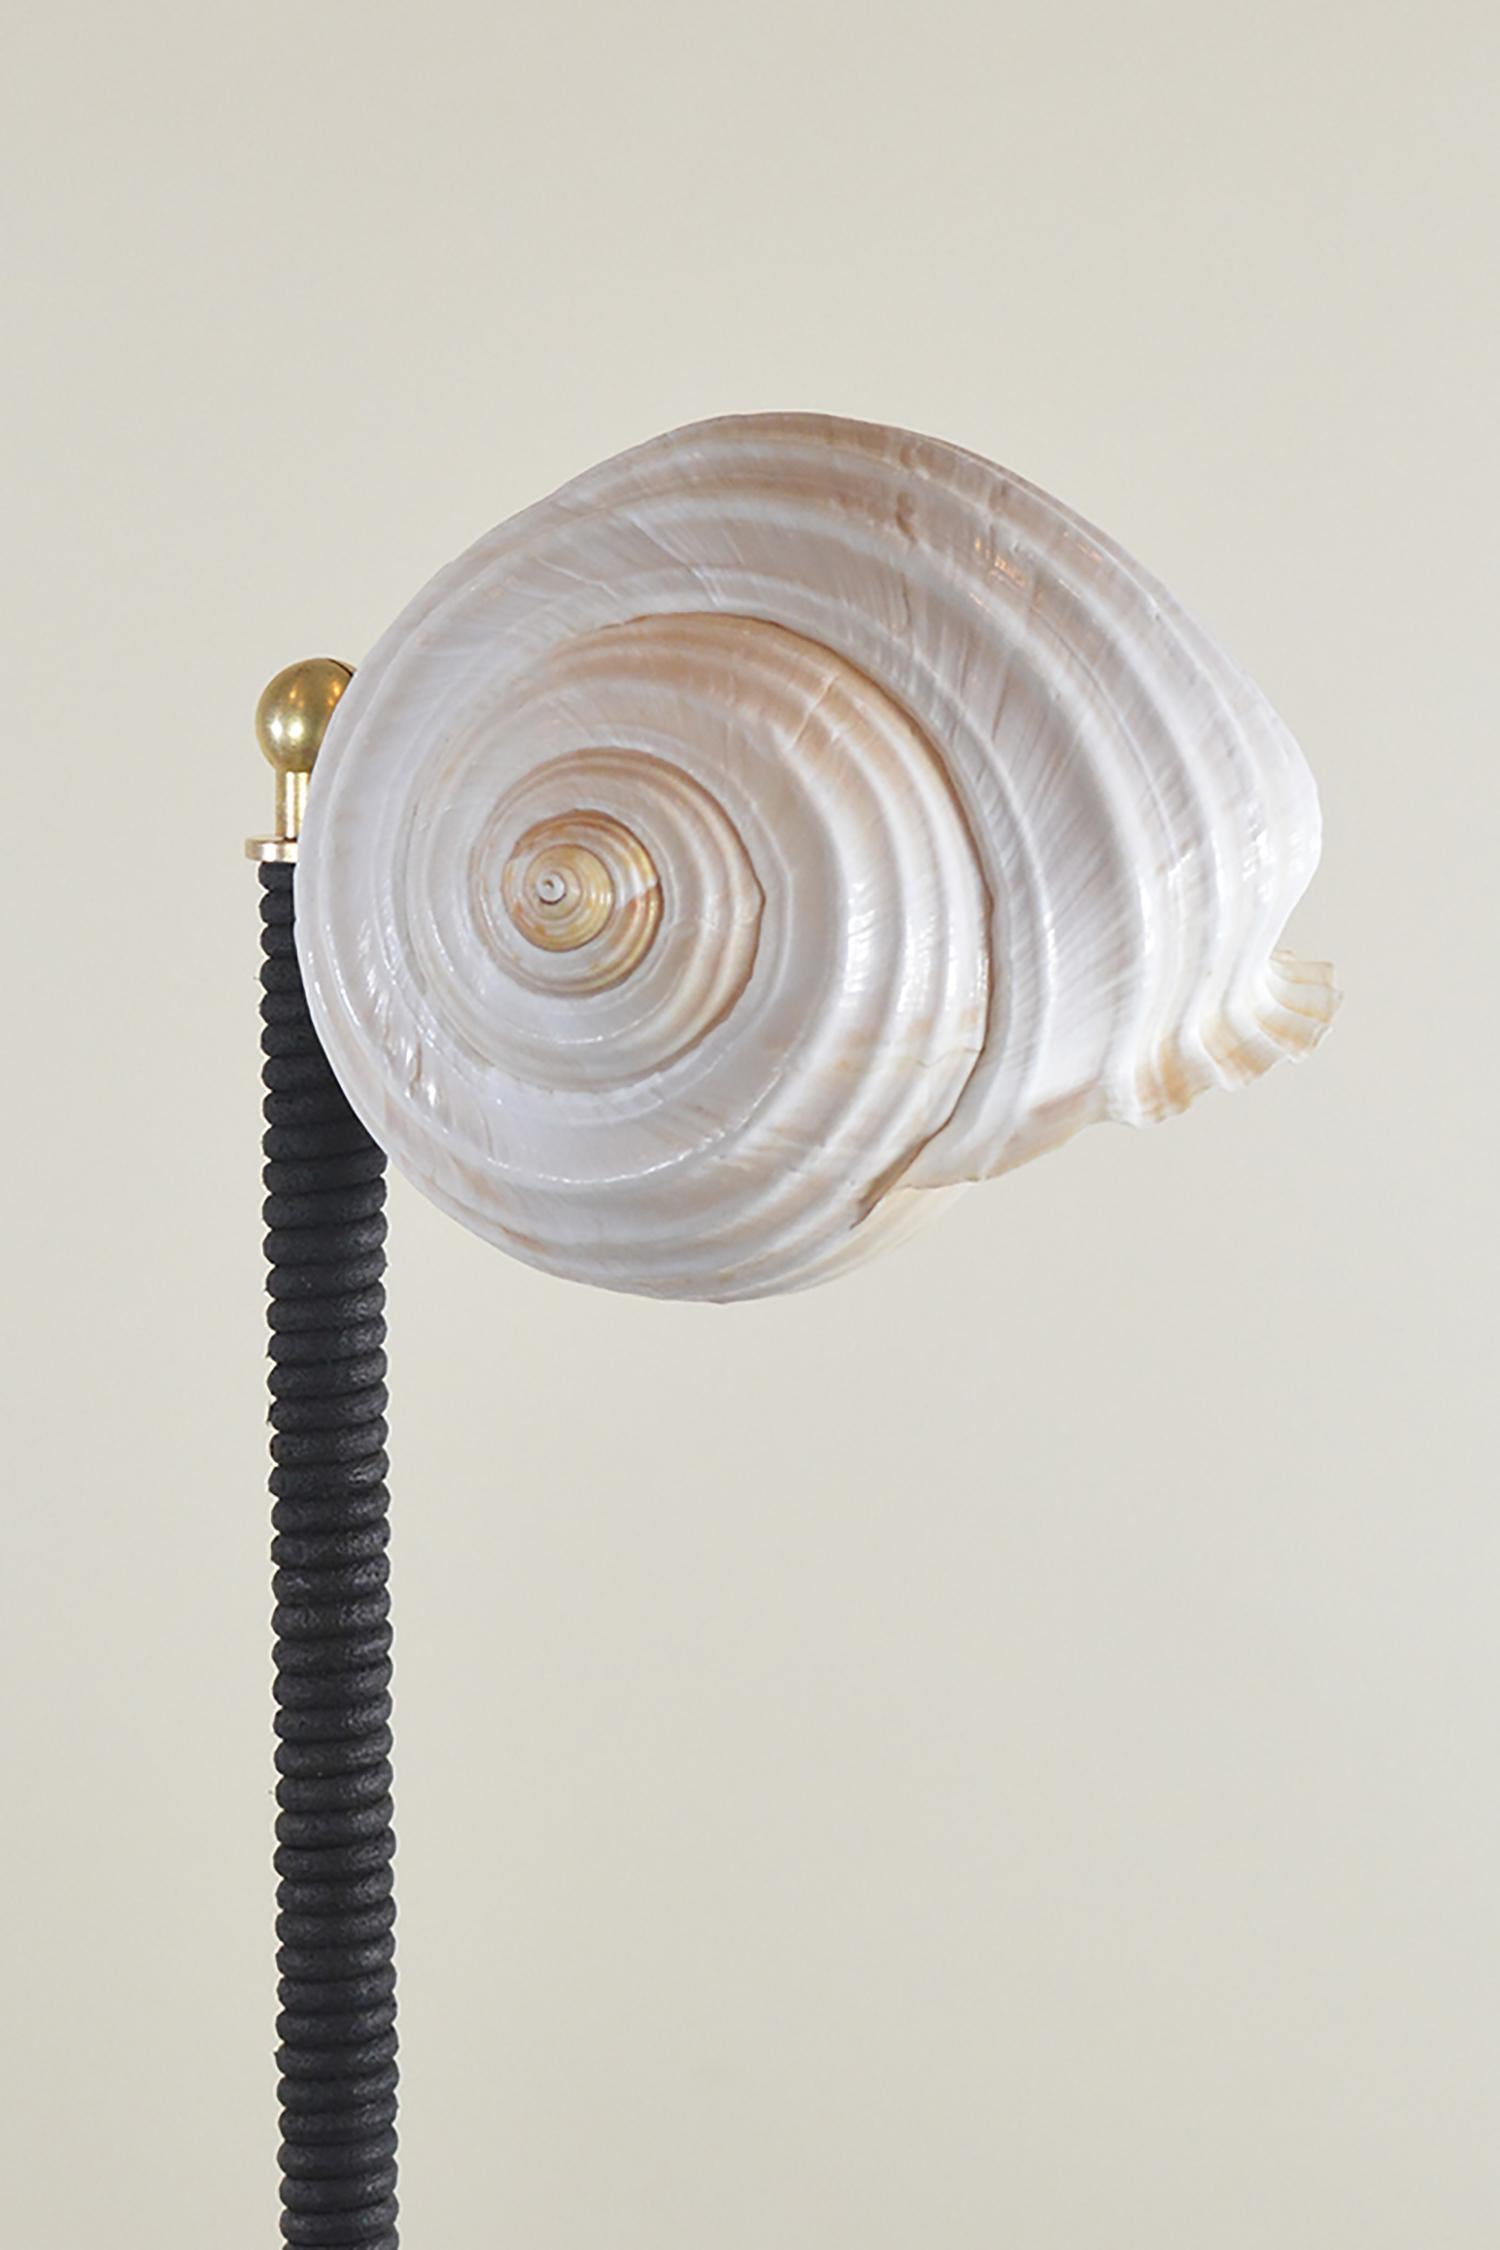 “Venus favors the bold.” —Ovid

L’Escargot Lamp is the latest release from the Venus Collection, a whimsical family of handmade fixtures inspired by the Surrealists and the natural forms of the sea. Employing the most recent advances in